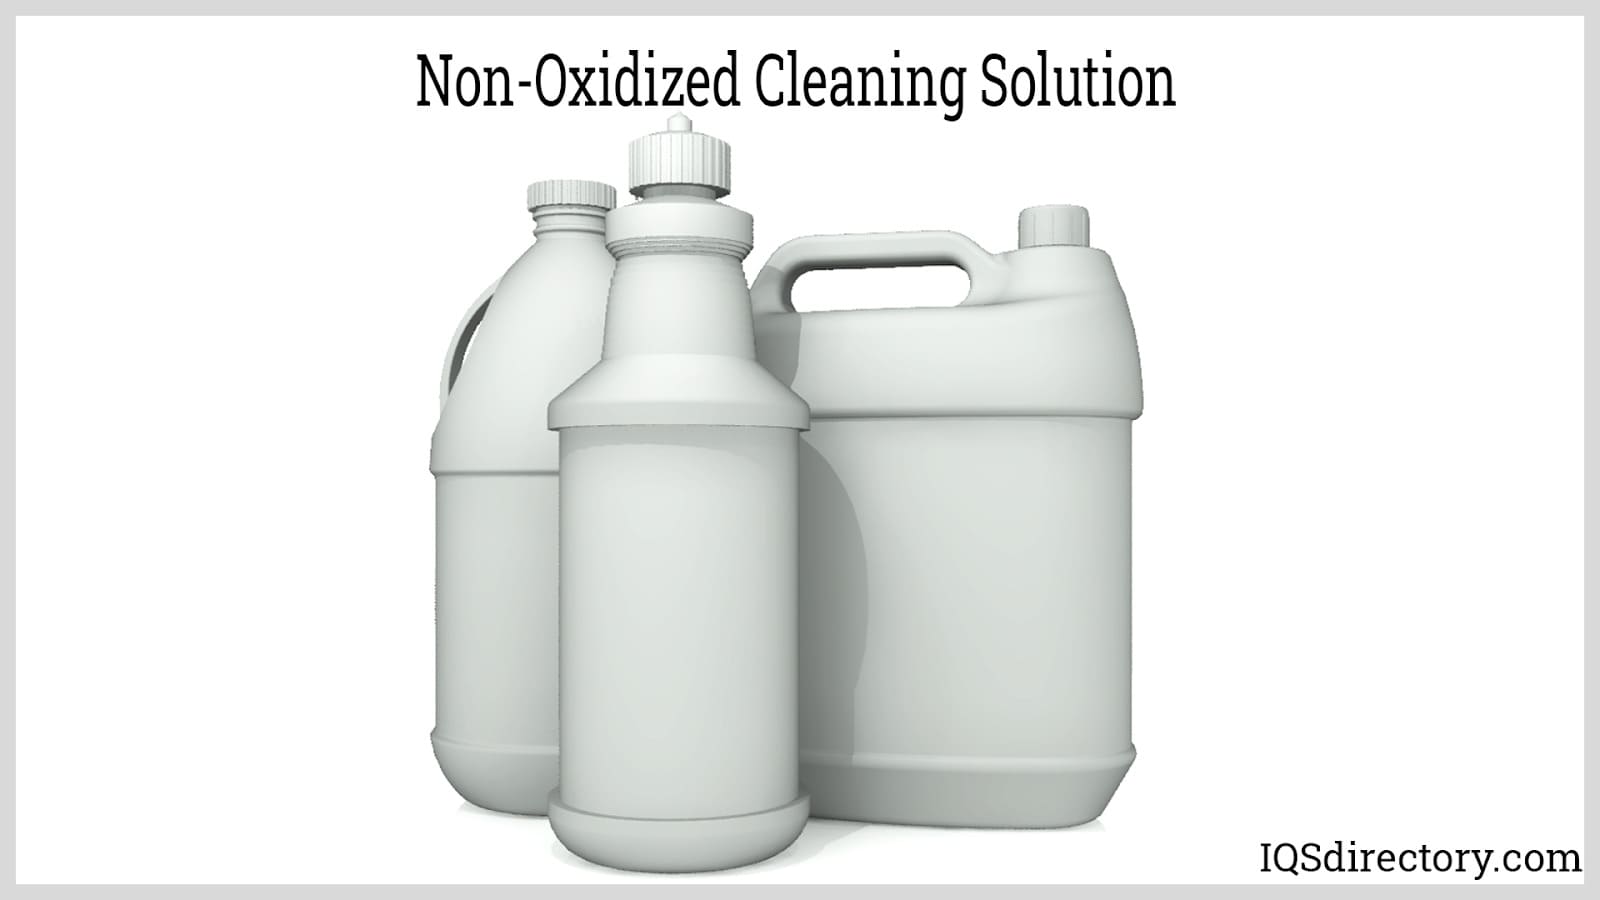 Non-Oxidized Cleaning Solution